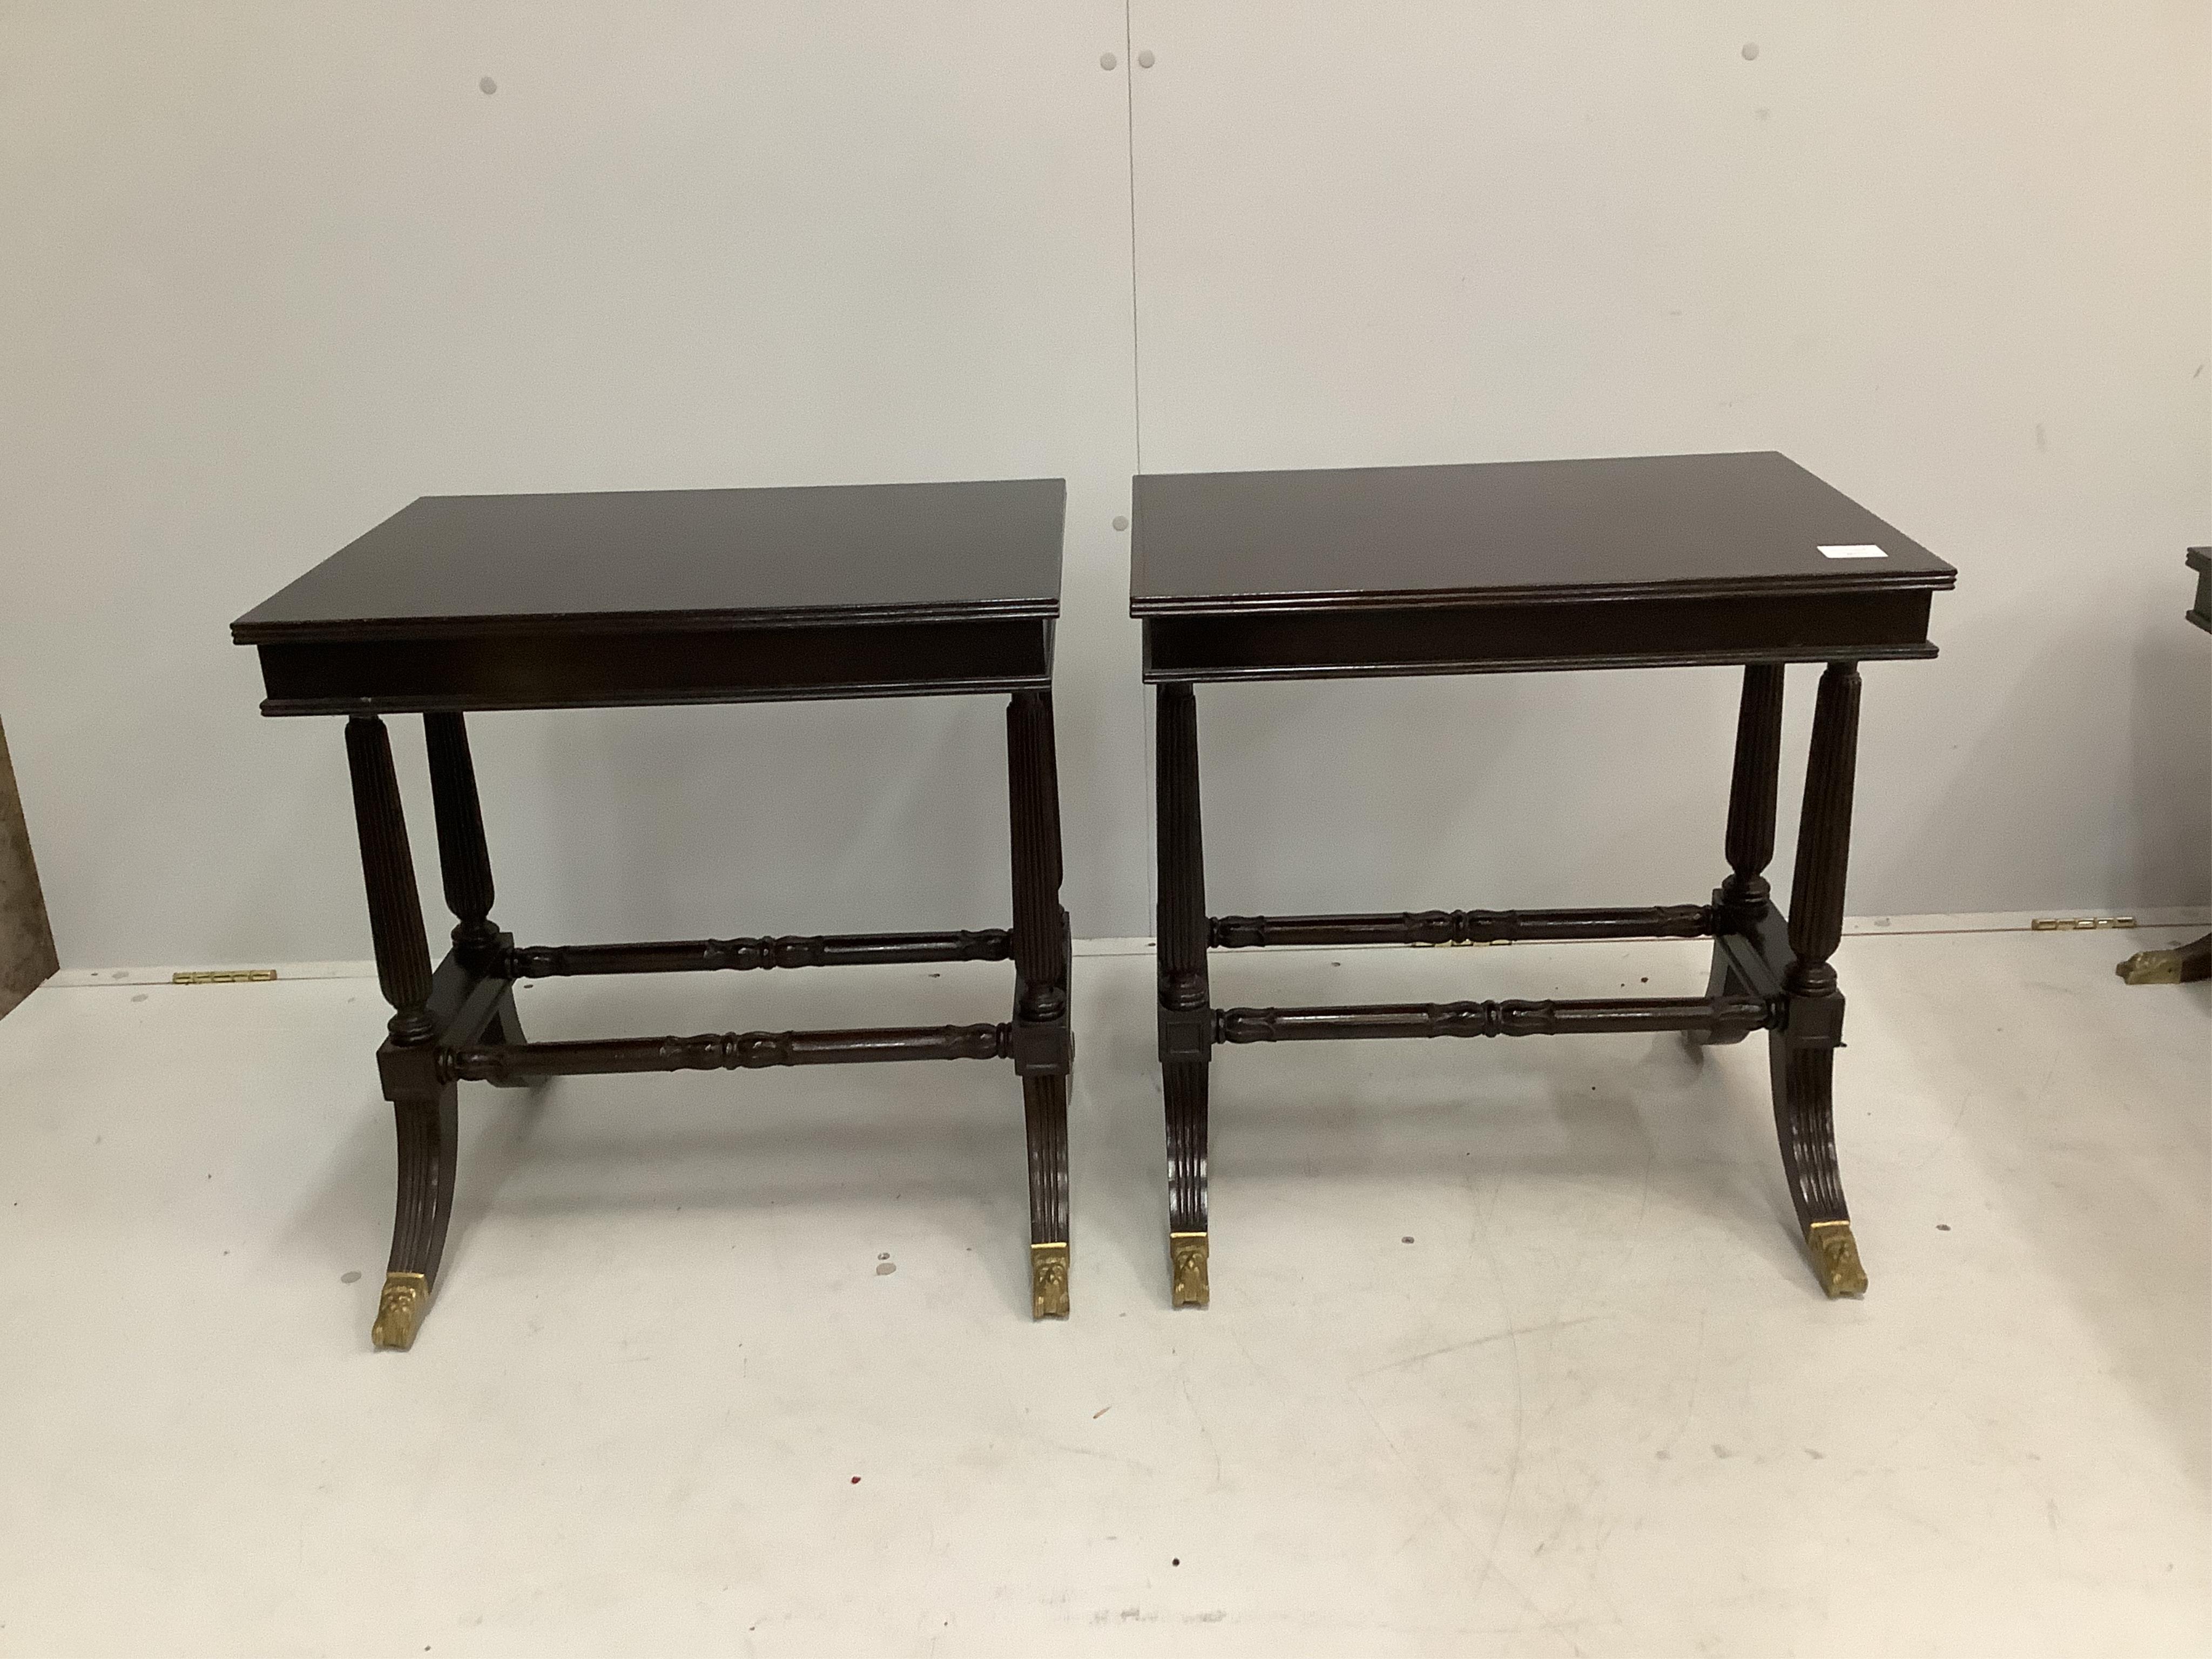 A pair of Regency style rectangular mahogany occasional tables, width 56cm, depth 42cm, height 58cm, together with a matching rectangular coffee table. Condition - fair